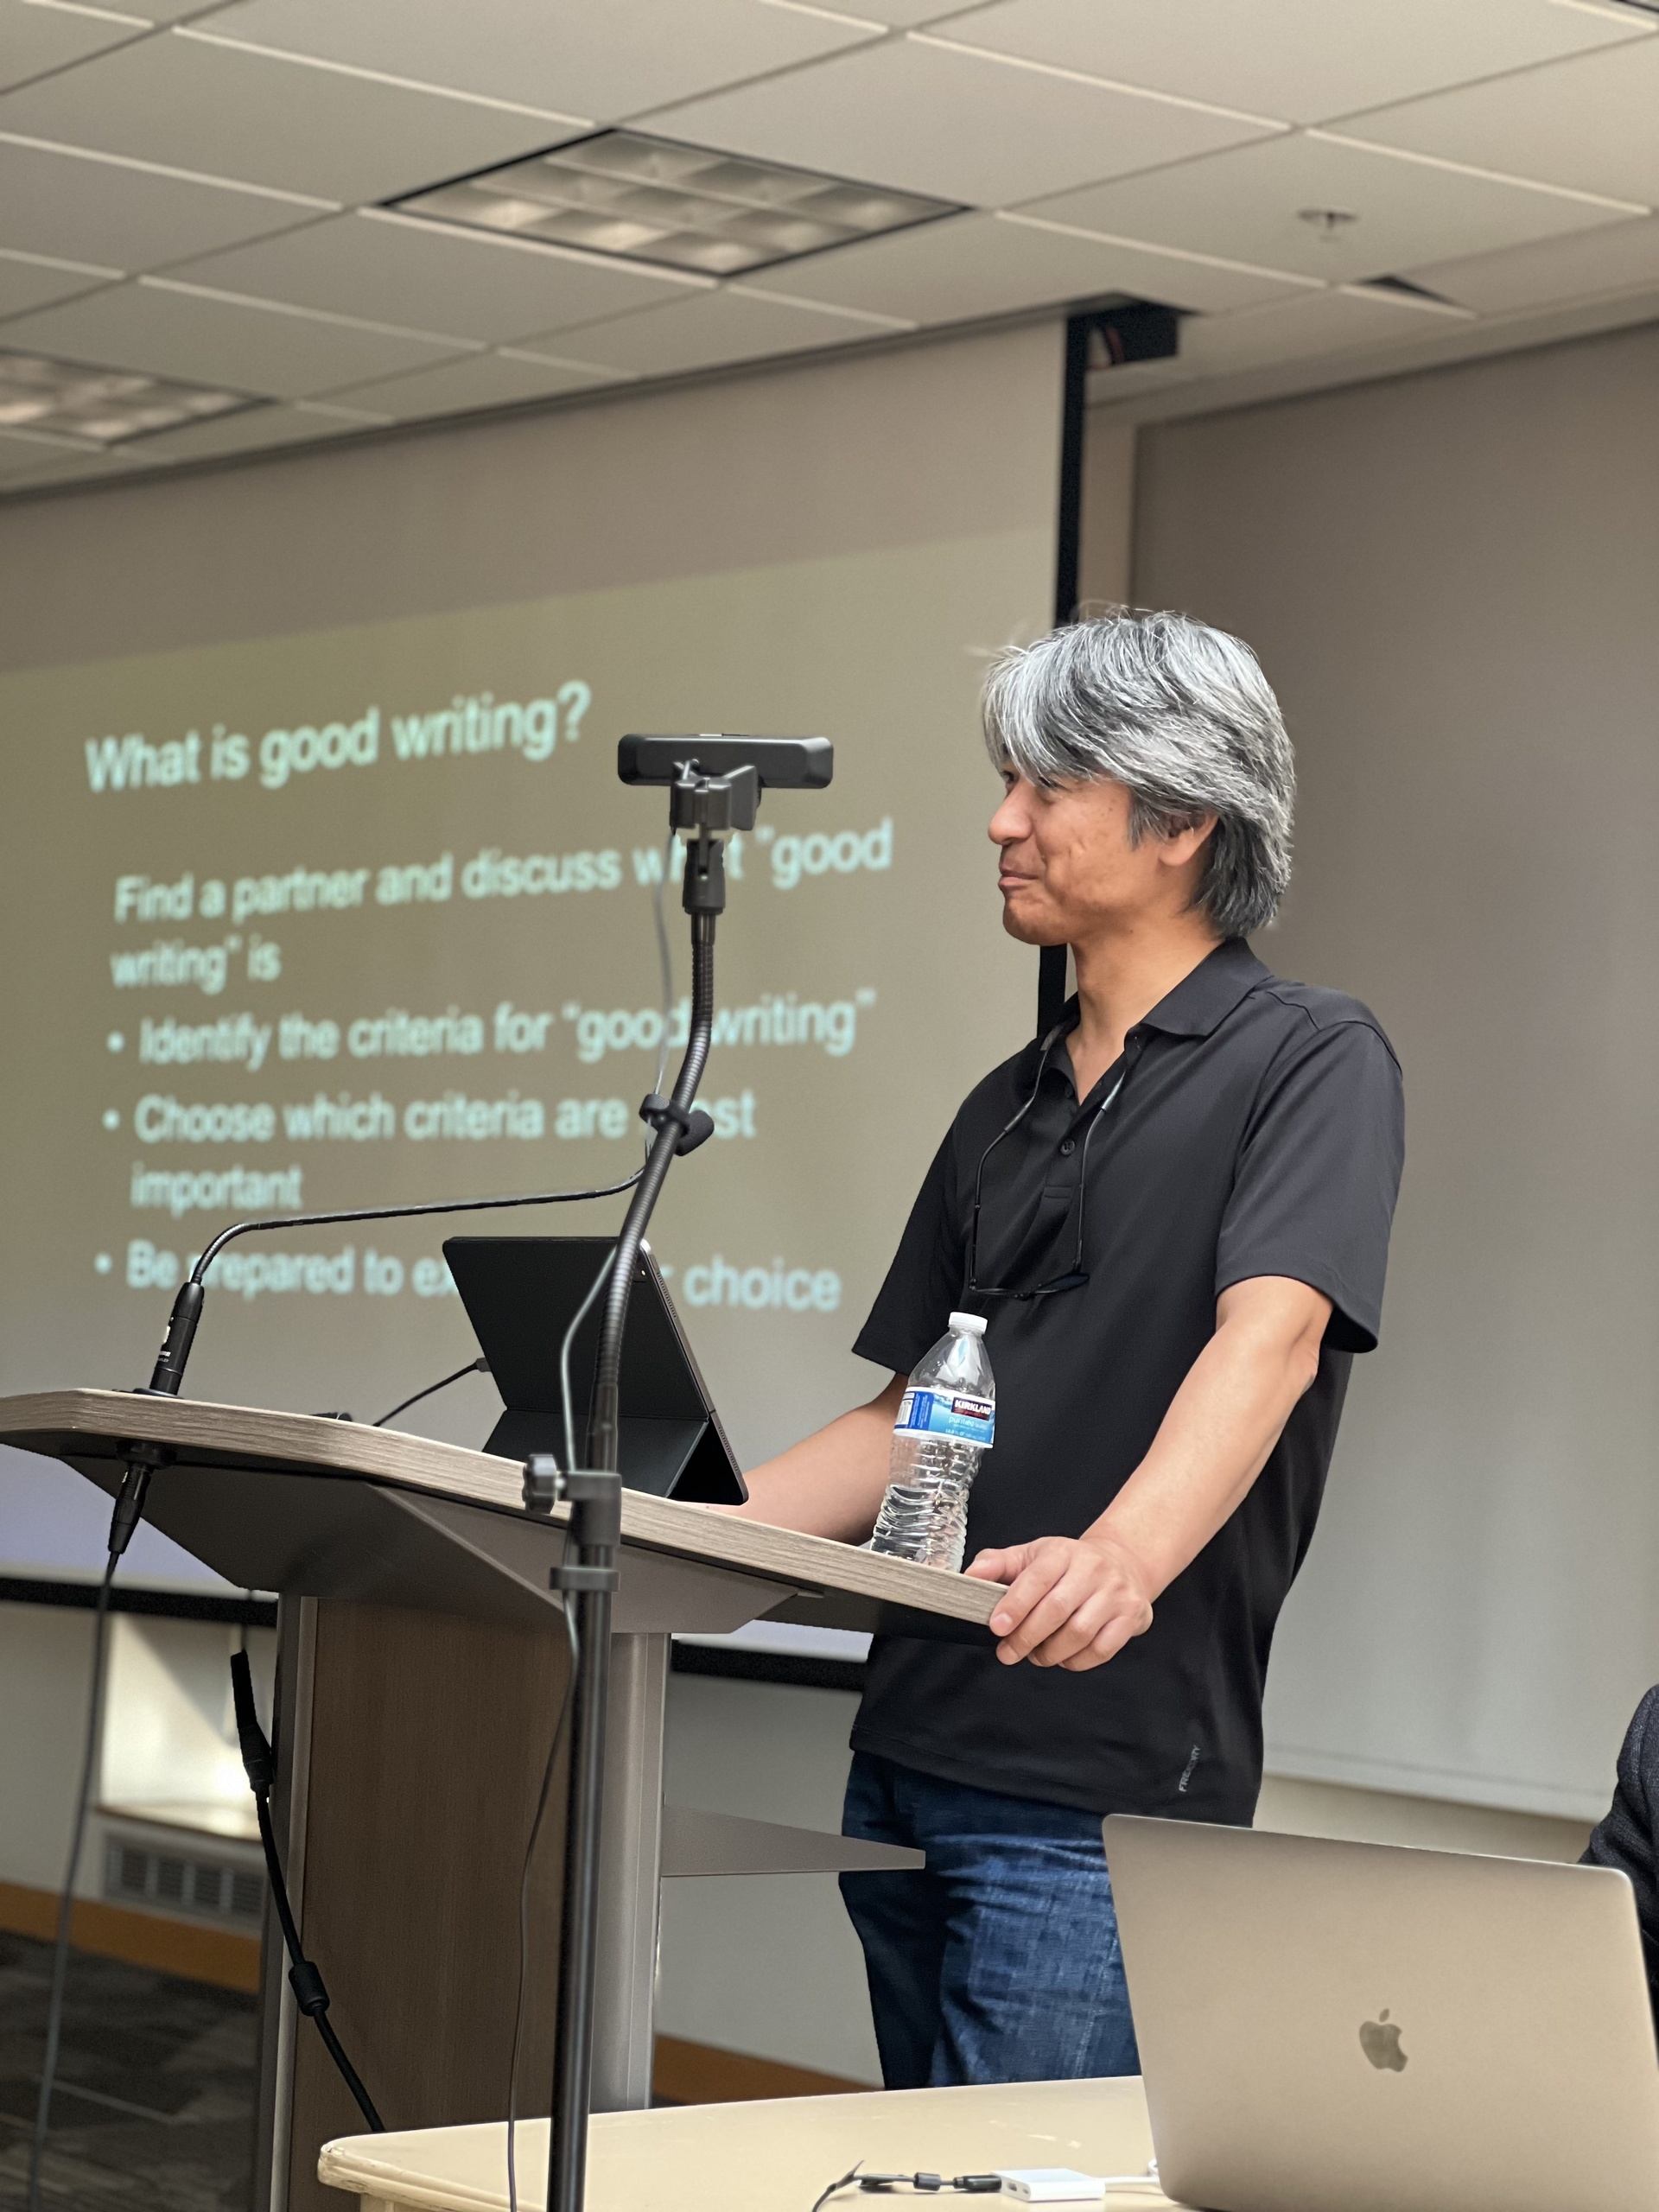 A photo of Paul Kei Matsuda delivering his presentation. On the background, the slide includes the following text: [What is good writing?​ Find a partner and discuss what ”good writing” is. ​Identify the criteria for “good writing”​. Choose which criteria are most important​. Be prepared to explain your choice​.]